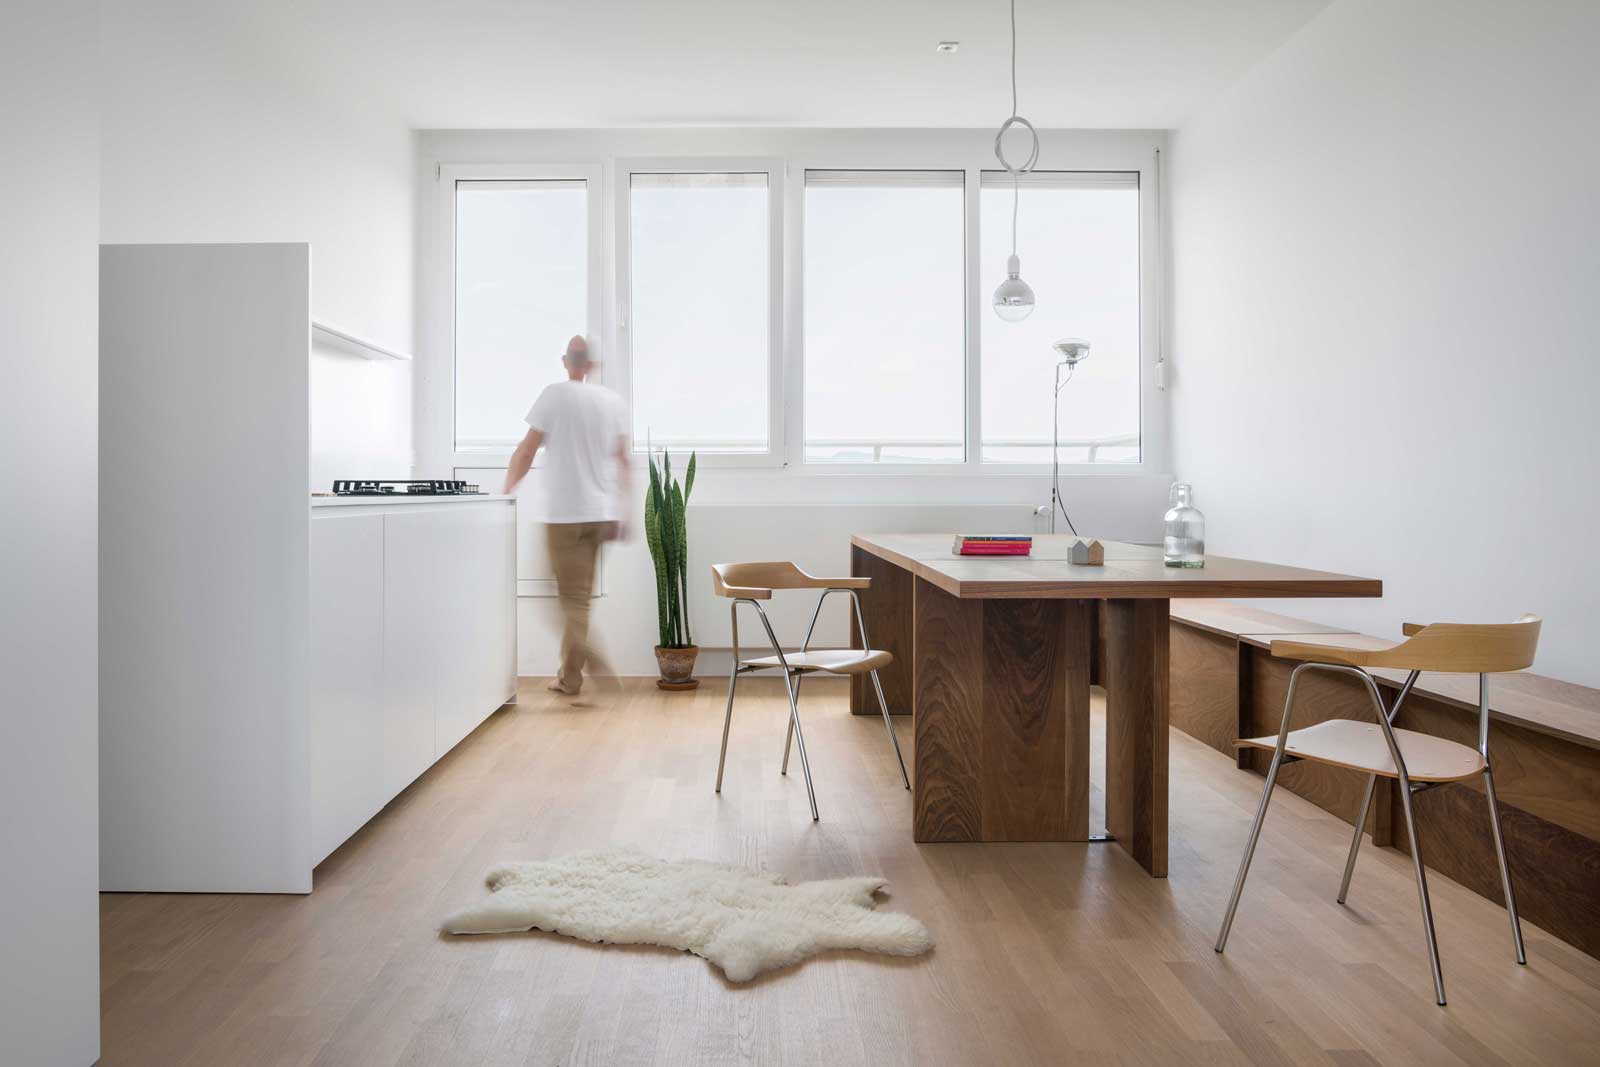 Renovation of an apartment in Ljubljana. An economical project with simple and open spaces